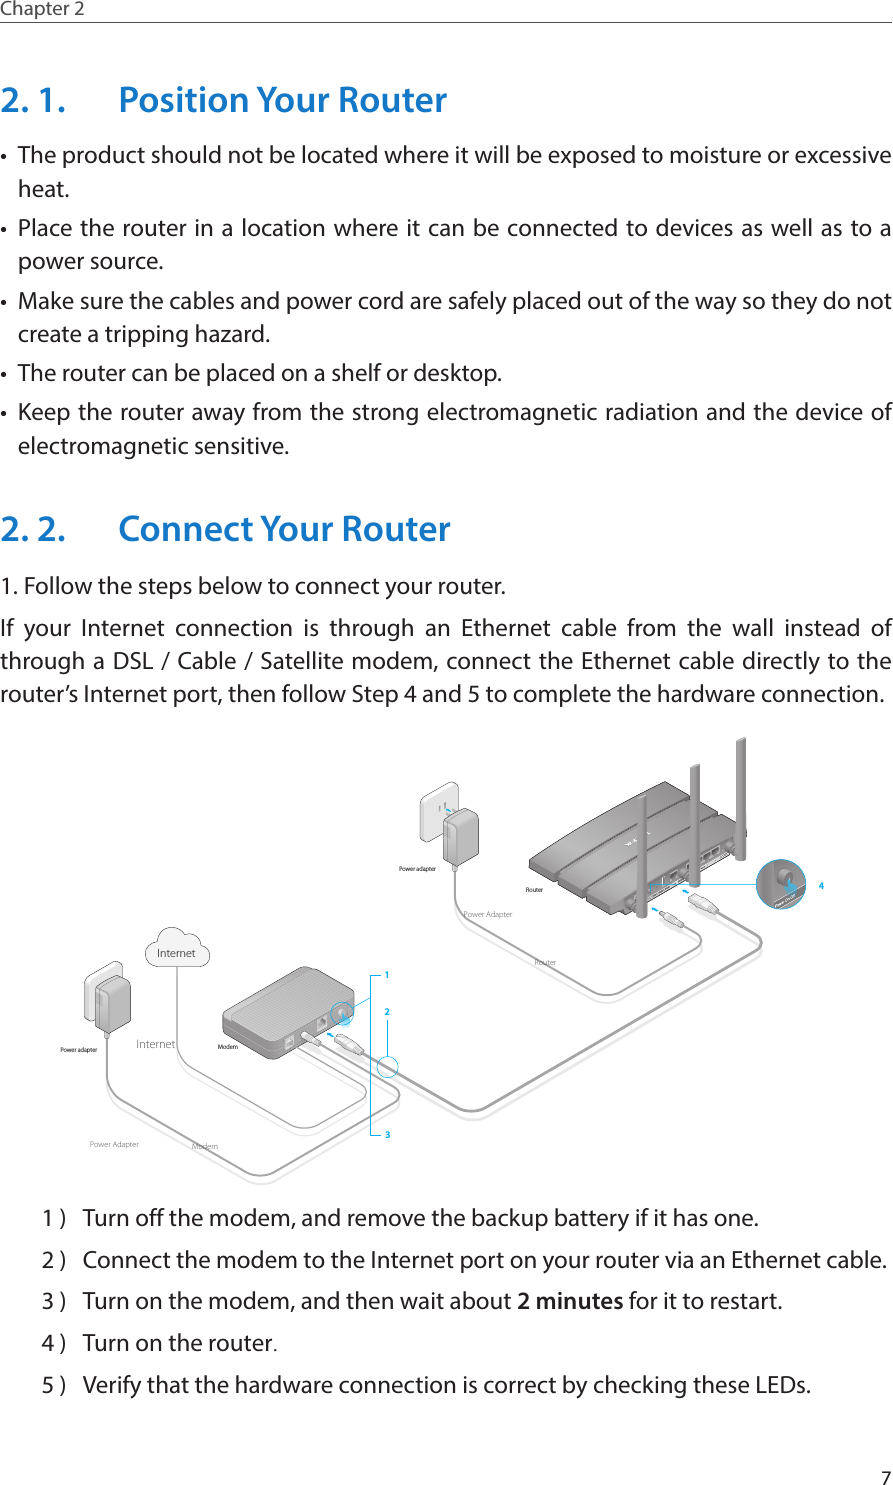 7Chapter 2  2. 1.  Position Your Router•  The product should not be located where it will be exposed to moisture or excessive heat.•  Place the router in a location where it can be connected to devices as well as to a power source.•  Make sure the cables and power cord are safely placed out of the way so they do not create a tripping hazard.•  The router can be placed on a shelf or desktop.•  Keep the router away from the strong electromagnetic radiation and the device of electromagnetic sensitive.2. 2.  Connect Your Router1. Follow the steps below to connect your router.If your Internet connection is through an Ethernet cable from the wall instead of through a DSL / Cable / Satellite modem, connect the Ethernet cable directly to the router’s Internet port, then follow Step 4 and 5 to complete the hardware connection.ModemPower adapterPower adapterRouter123Internet4ModemRouterInternetPower AdapterPower Adapter1 )  Turn off the modem, and remove the backup battery if it has one.2 )  Connect the modem to the Internet port on your router via an Ethernet cable.3 )  Turn on the modem, and then wait about 2 minutes for it to restart.4 )  Turn on the router.5 )  Verify that the hardware connection is correct by checking these LEDs.